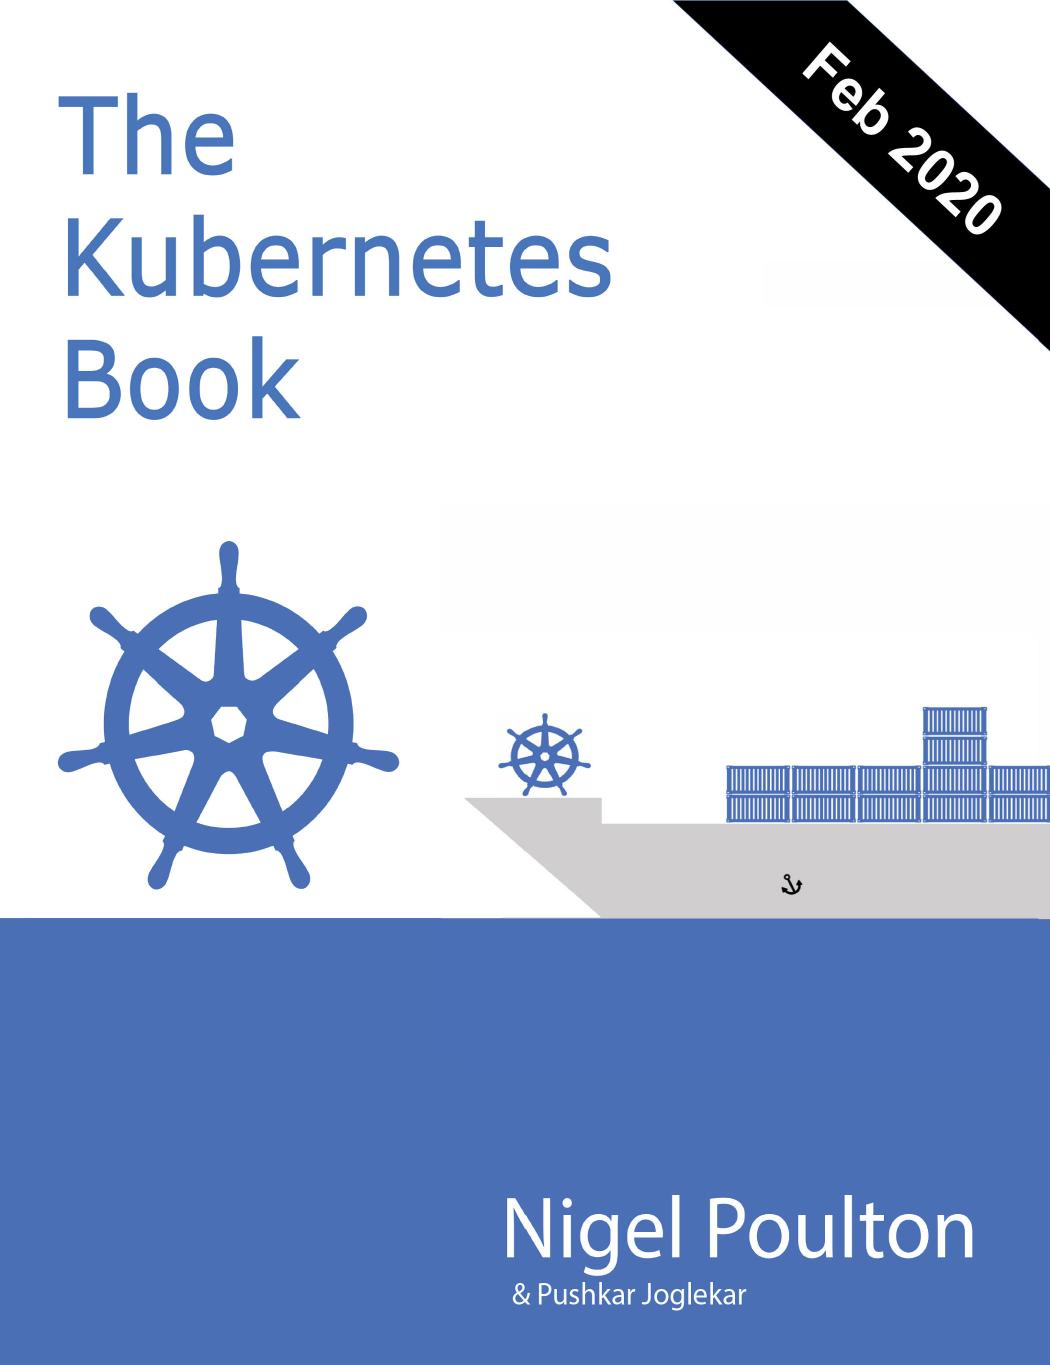 The Kubernetes Book - February 2020 Edition